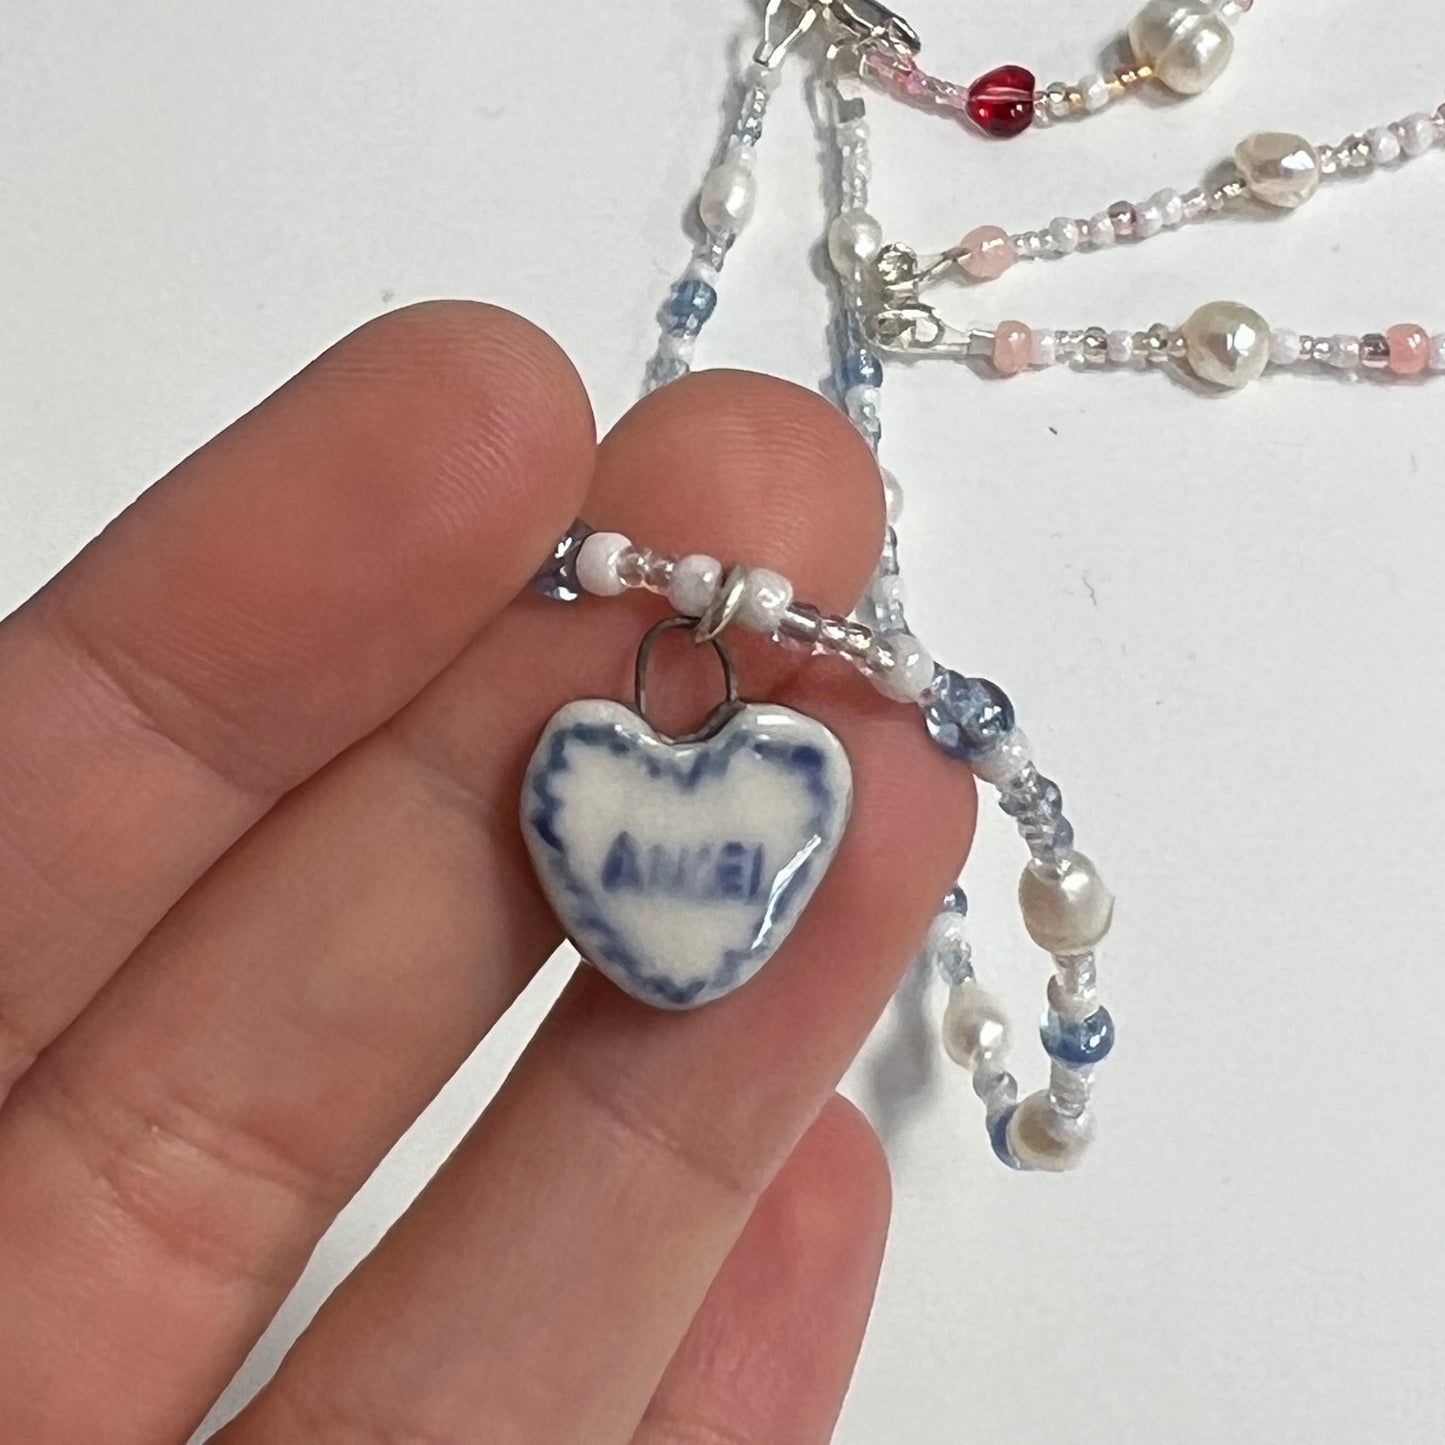 "Angel" Cloudy Heart Necklace